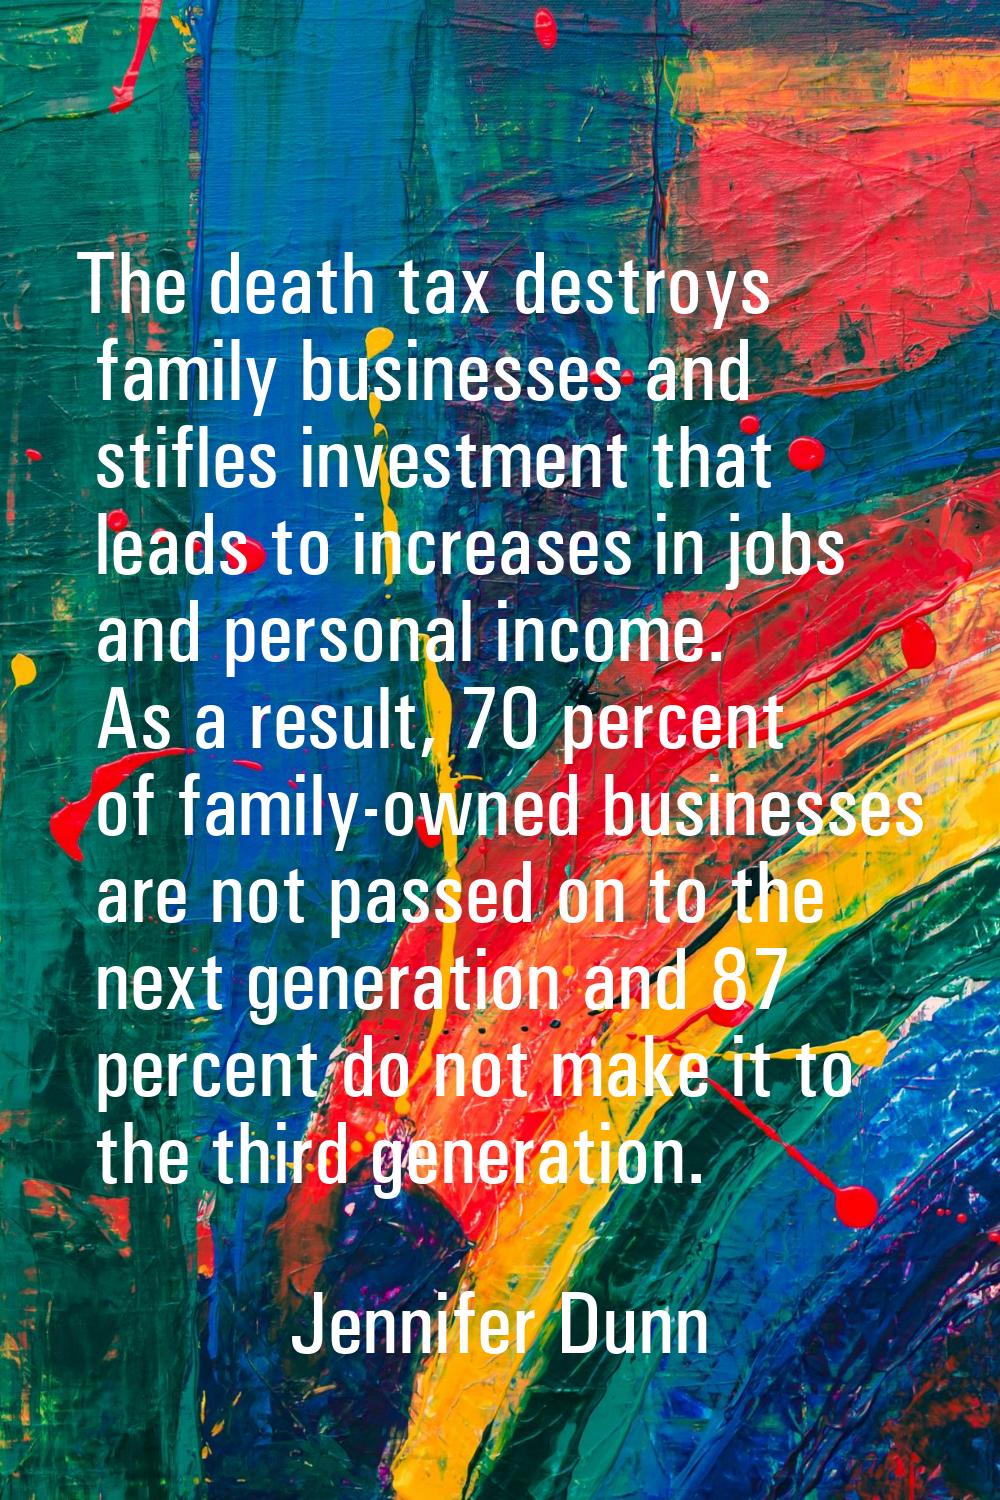 The death tax destroys family businesses and stifles investment that leads to increases in jobs and